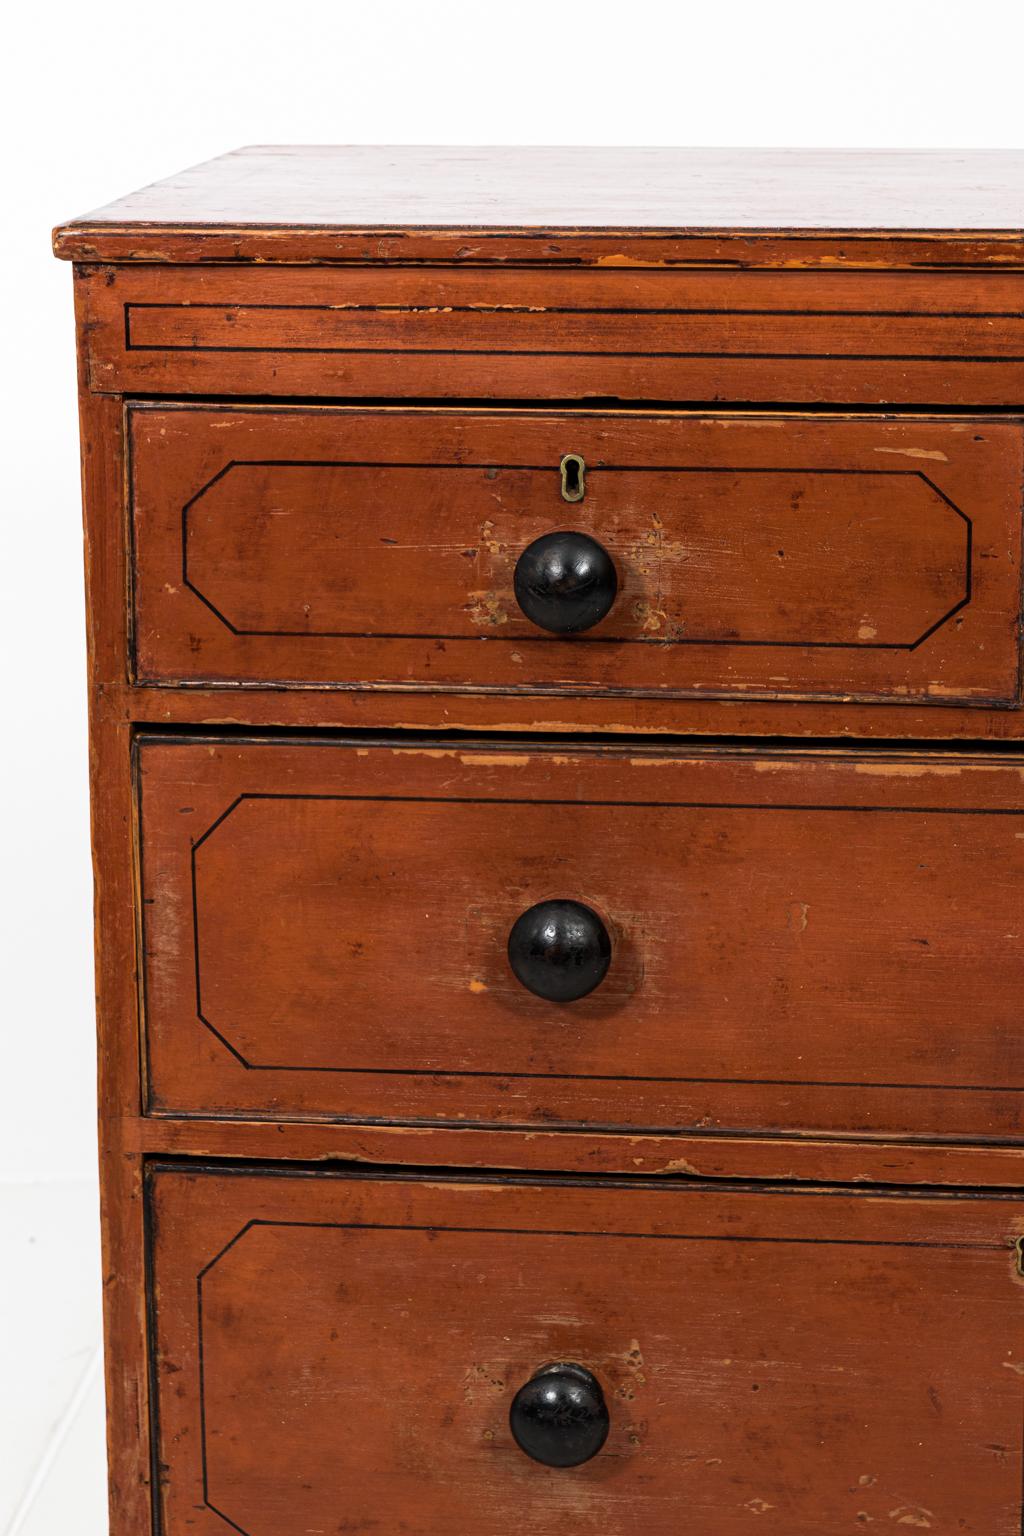 Four-drawer chest of drawers or commode on ogee shaped bracket feet in an antiqued finish, circa 1830s. The piece is also painted throughout with black trim and handles. Please note of wear consistent with age including minor surface dents and